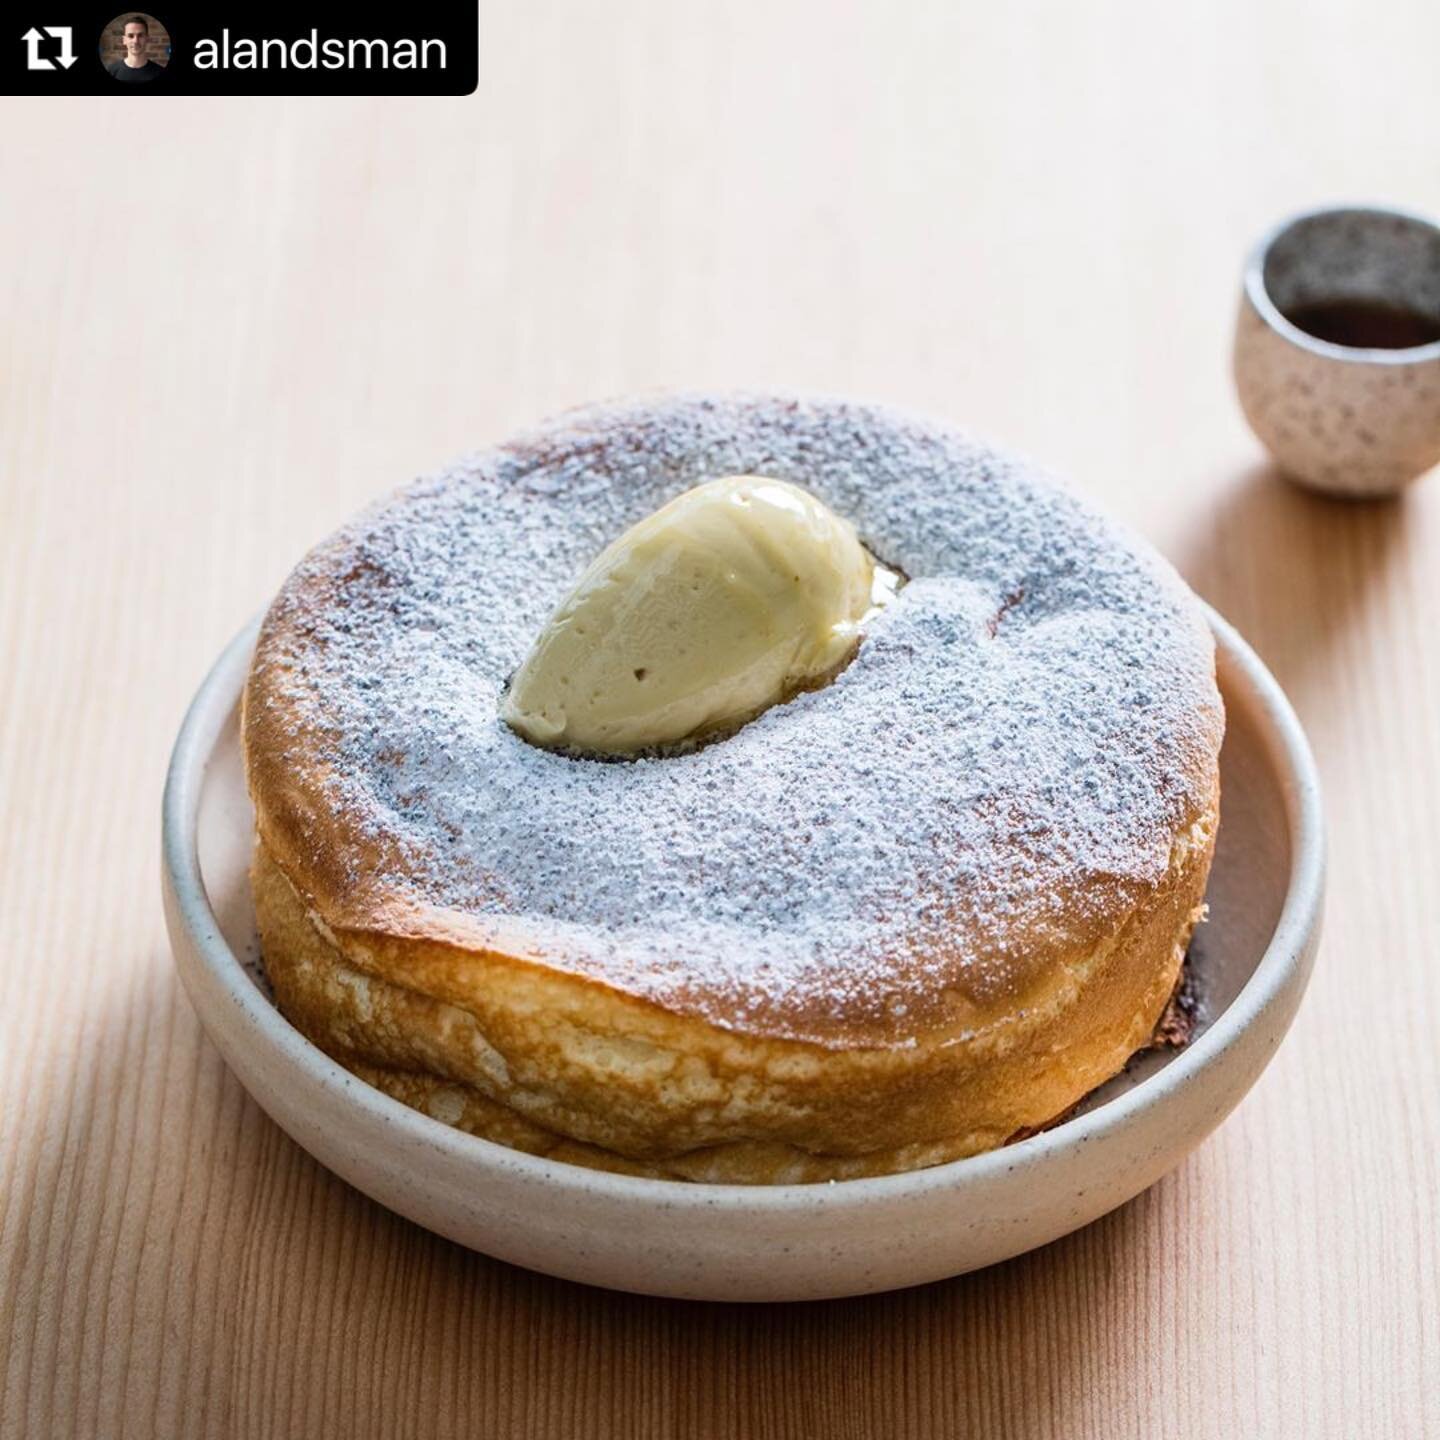 Brunch starts at @thirdsbk tomorrow! Sneaky Pete for VIP friends which is YOU if you&rsquo;re here. Book now on @resy and this hottokekki can be in your belly! 🥞 🇯🇵